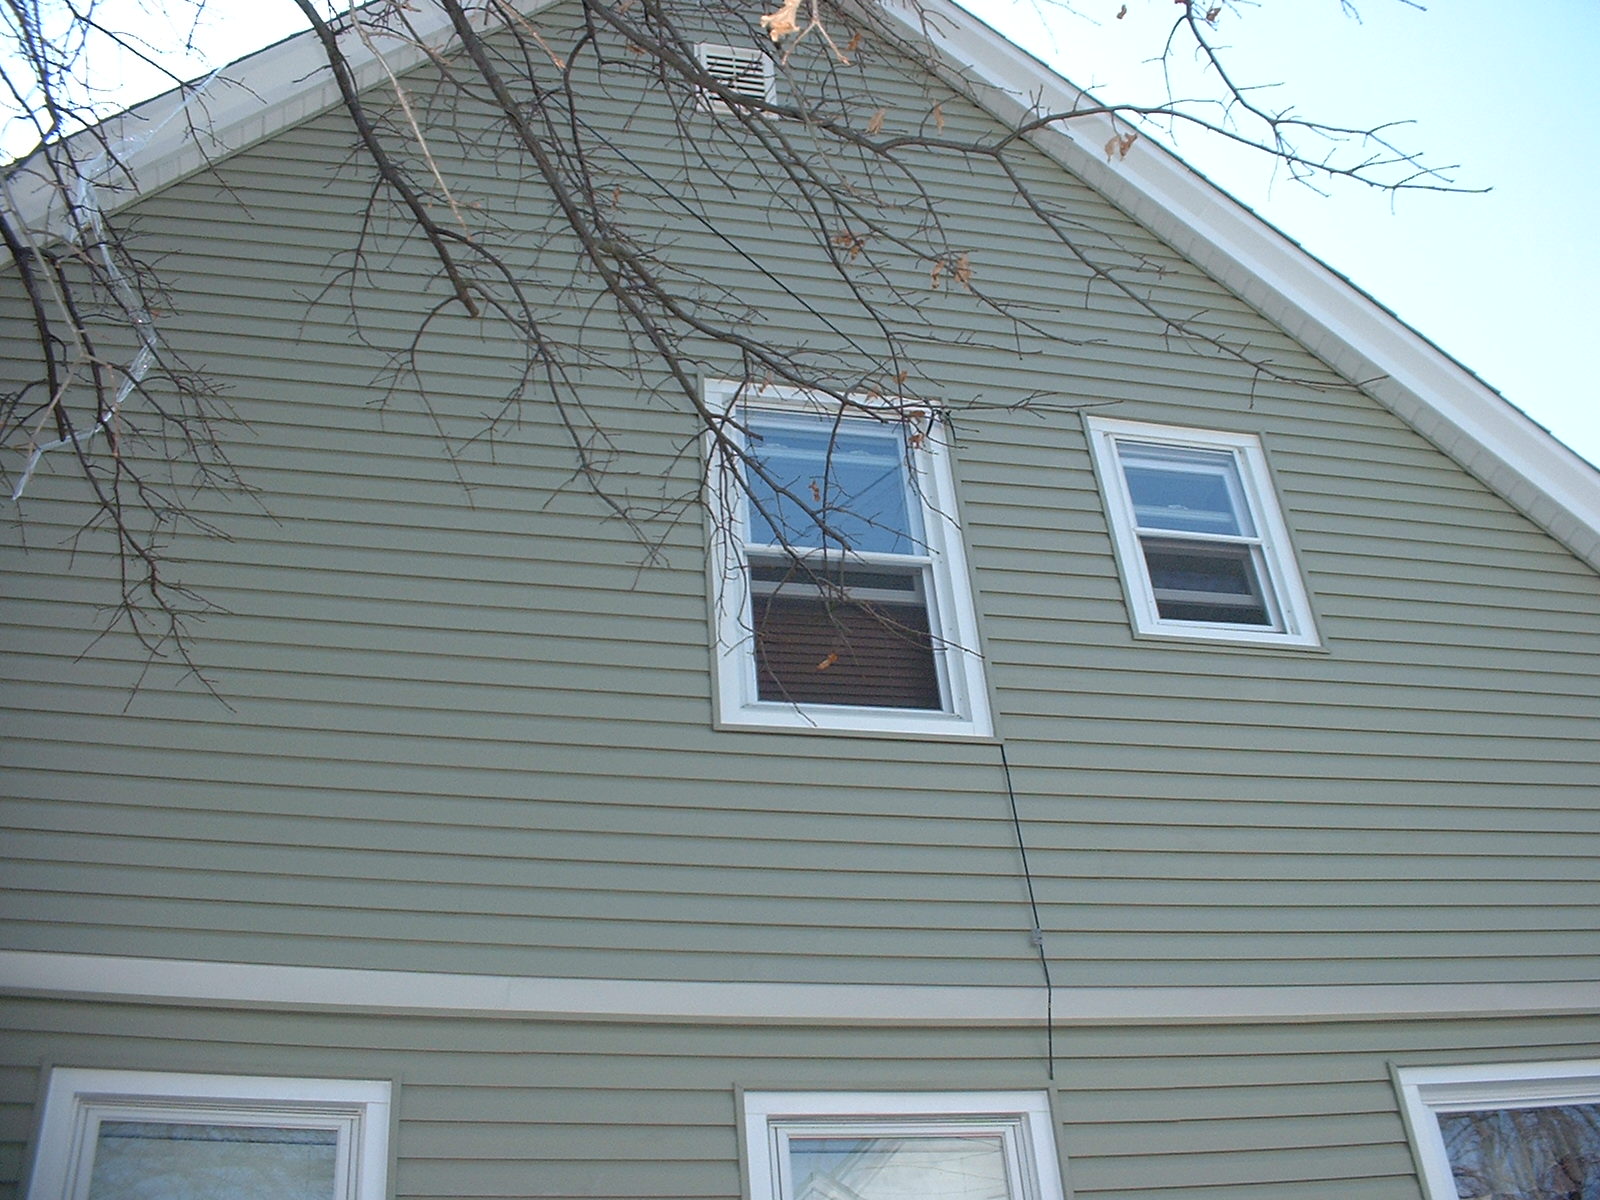 After taking down the existing siding on the gable end, we found old roofing, which had to be removed also.